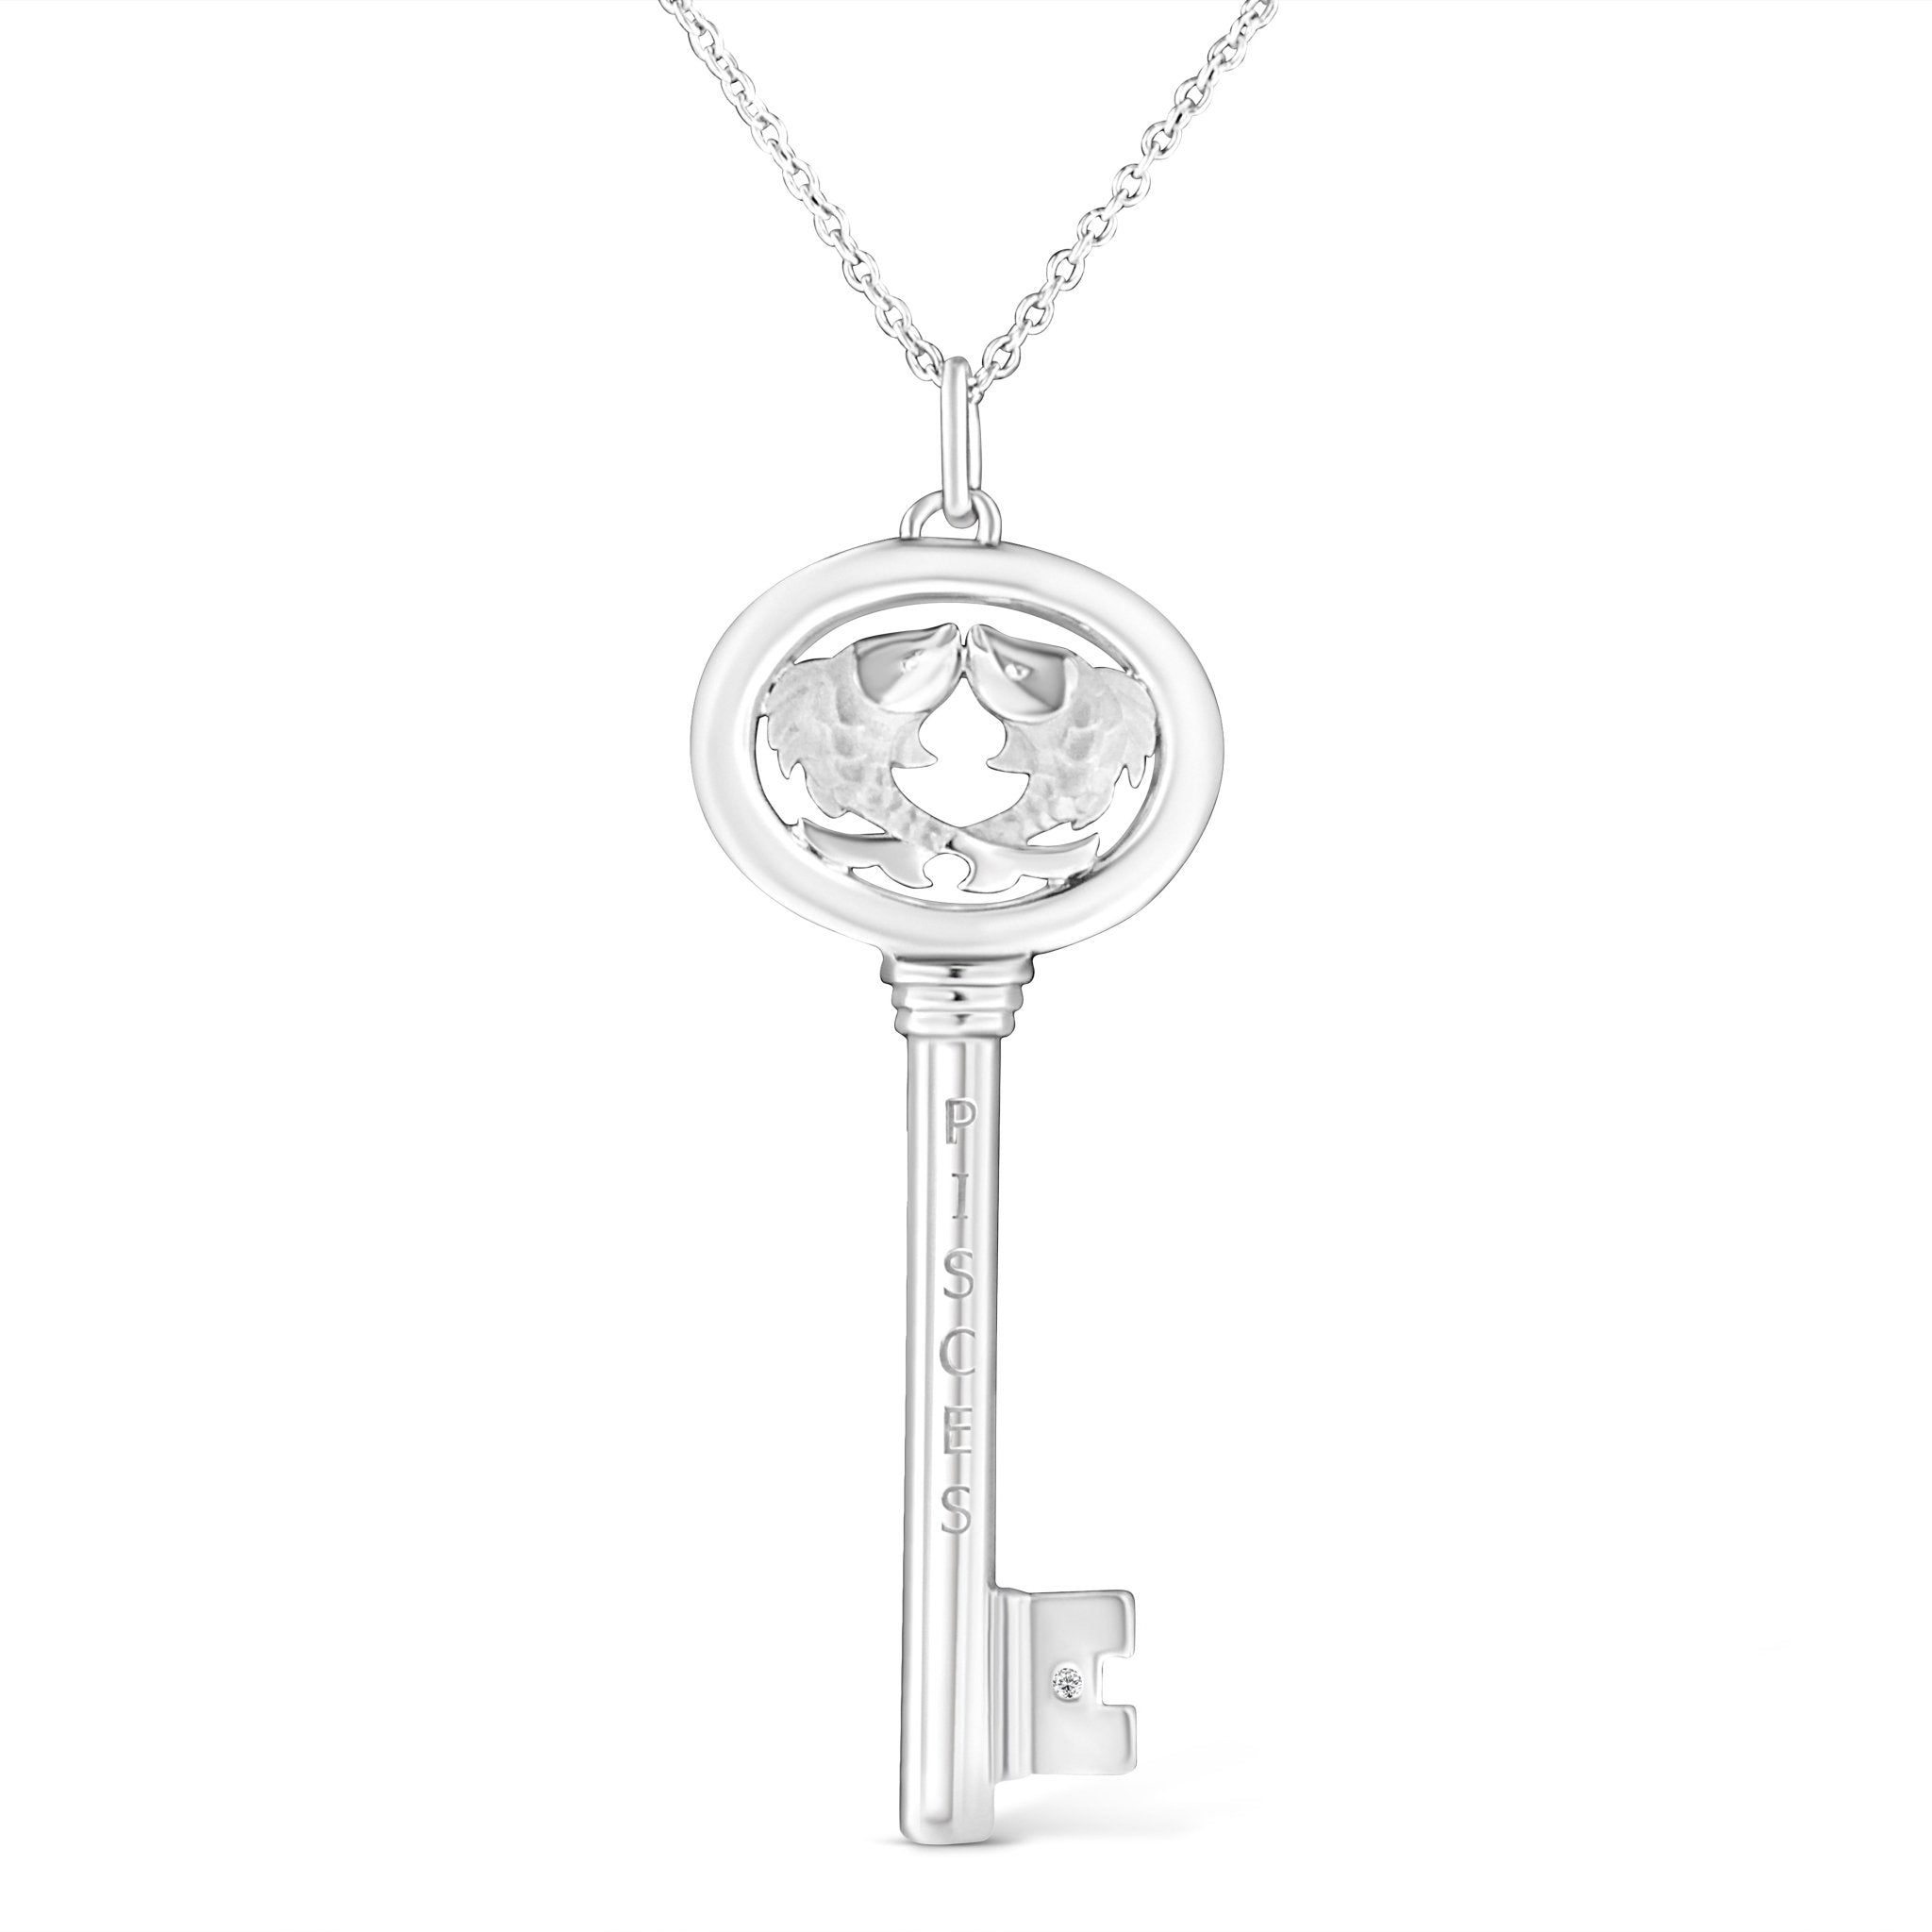 .925 Sterling Silver Diamond Accent Pisces Zodiac Key 18" Pendant Necklace (K-L Color, I1-I2 Clarity) - Tuesday Morning-Pendant Necklace